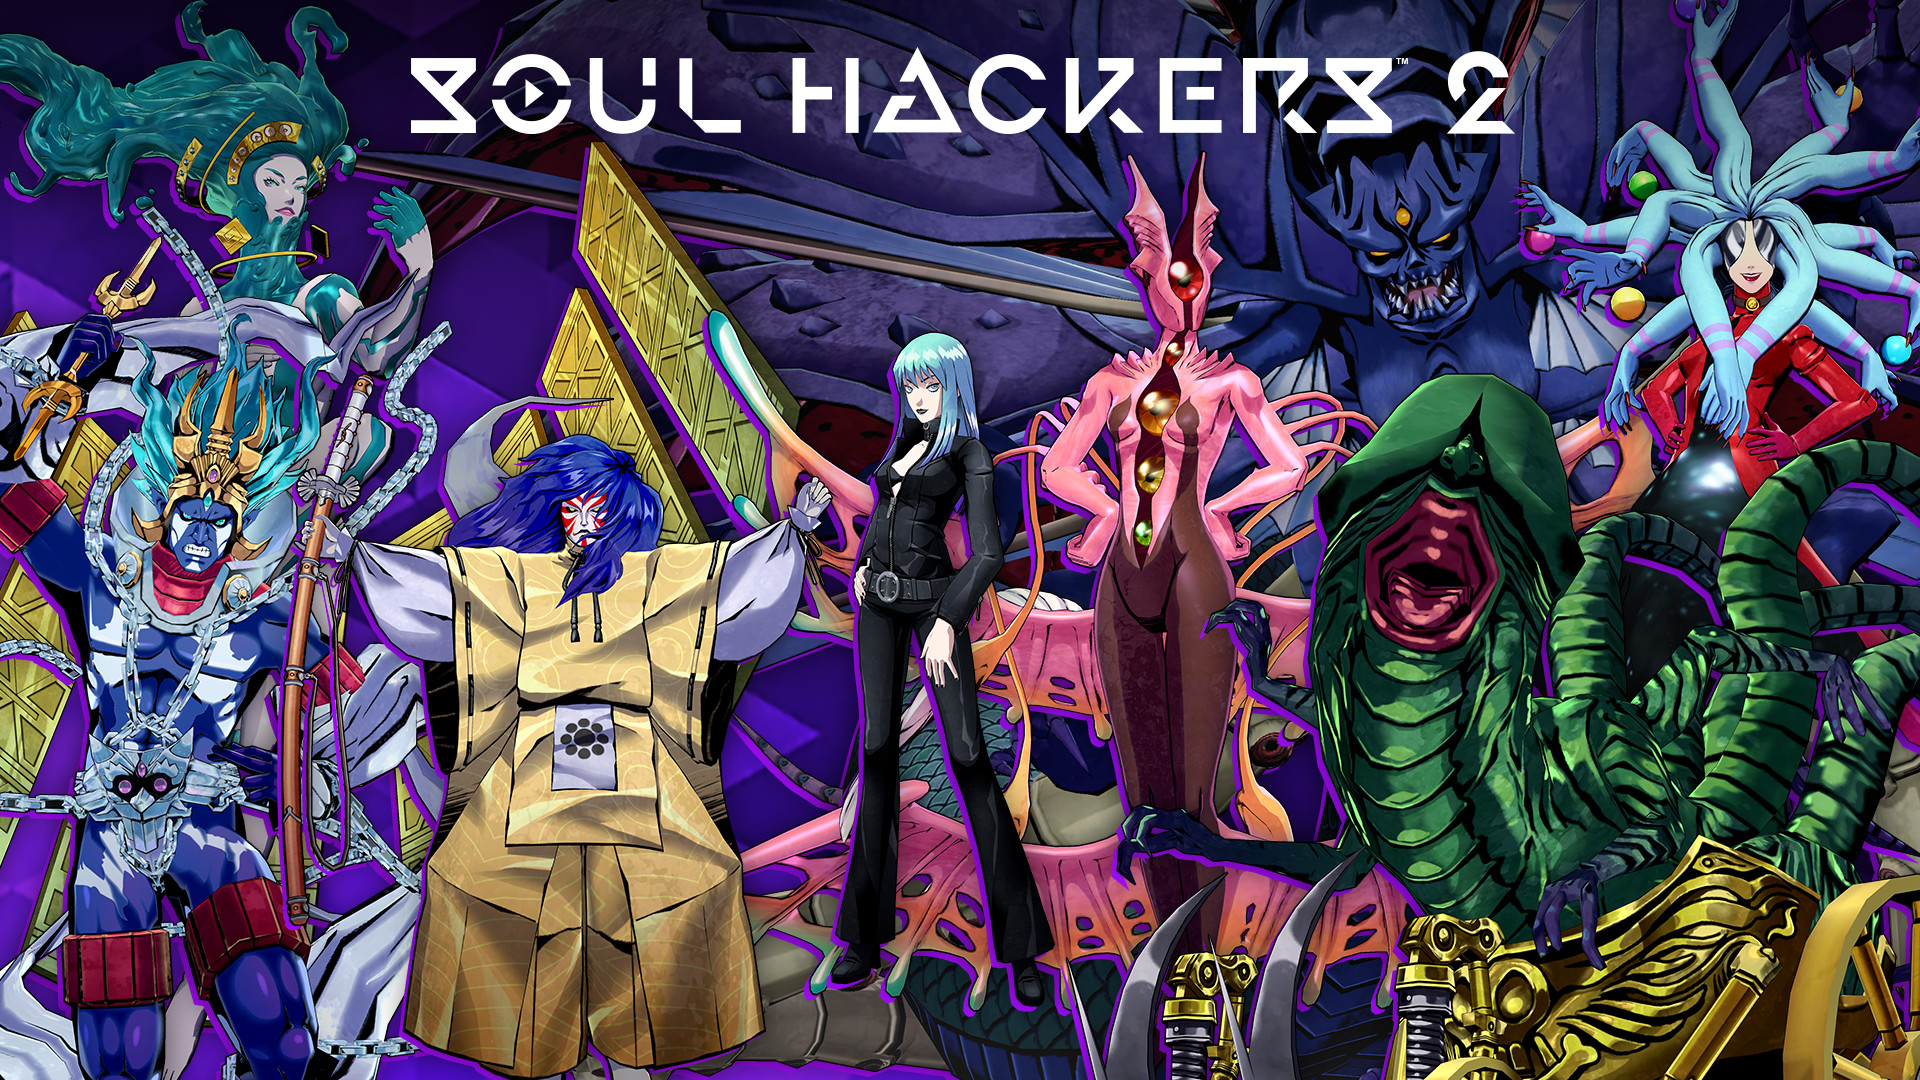 Soul Hackers 2 Update Patches in 4 More Demons - Siliconera